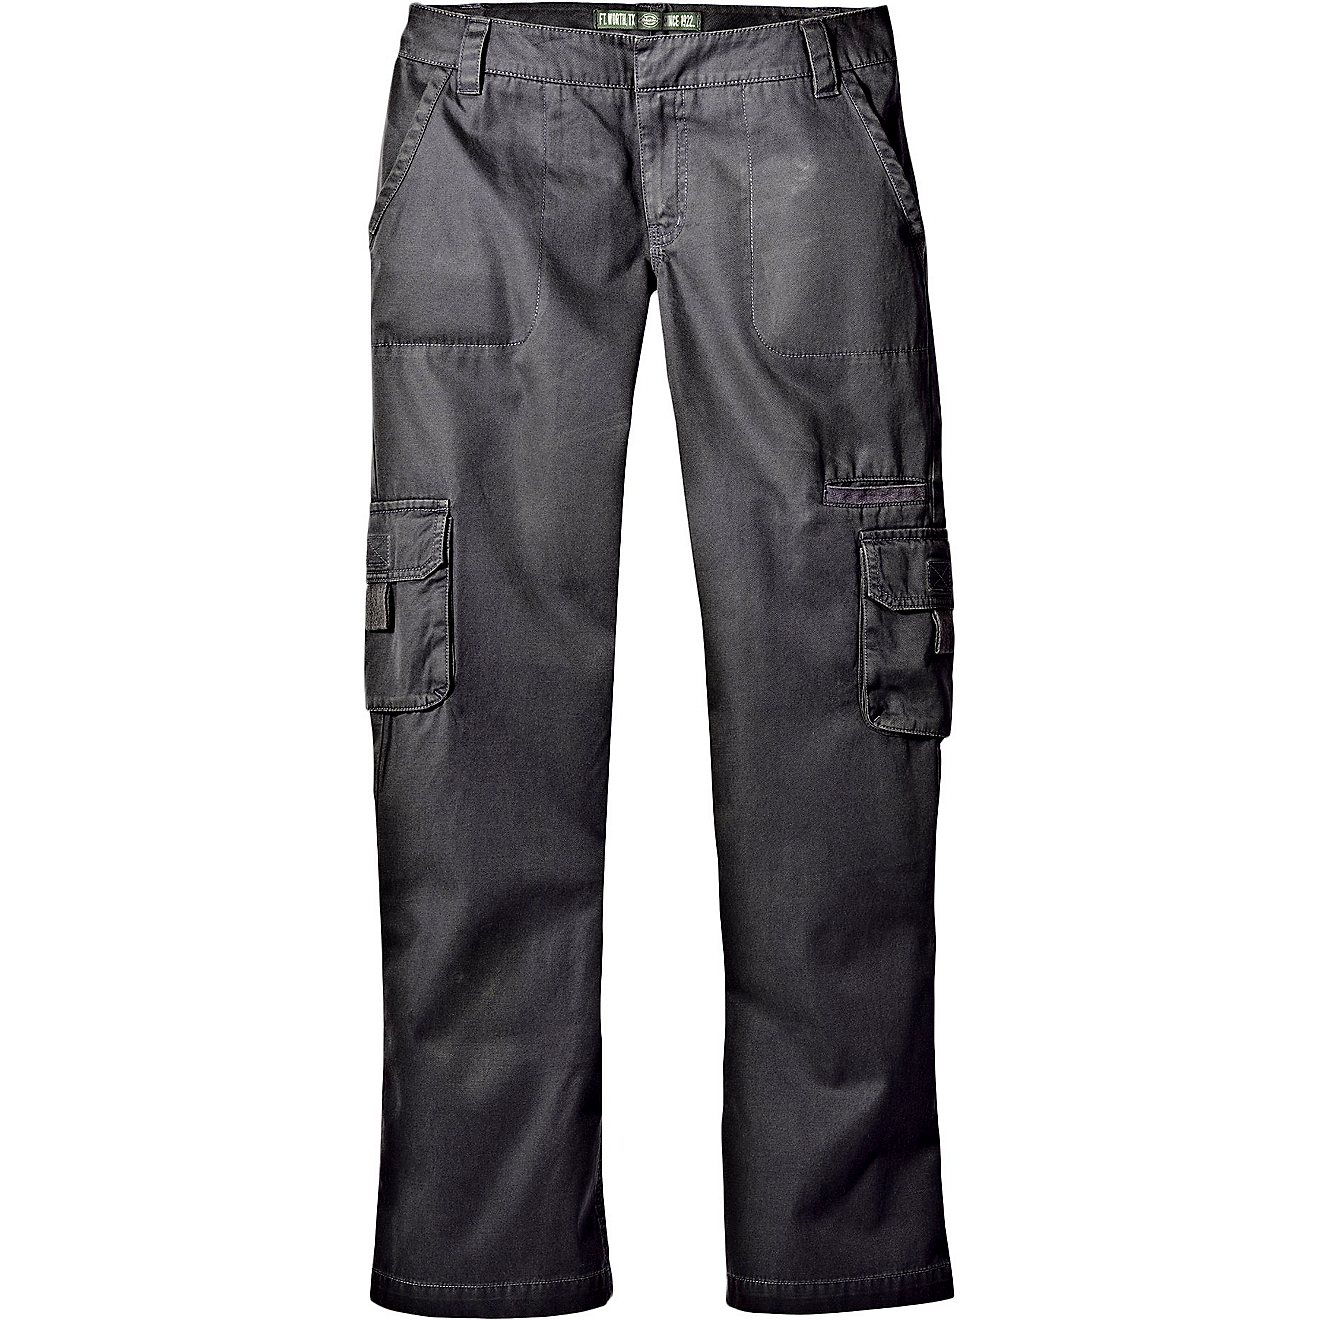 Dickies Women's Relaxed Fit Cargo Pant | Free Shipping at Academy